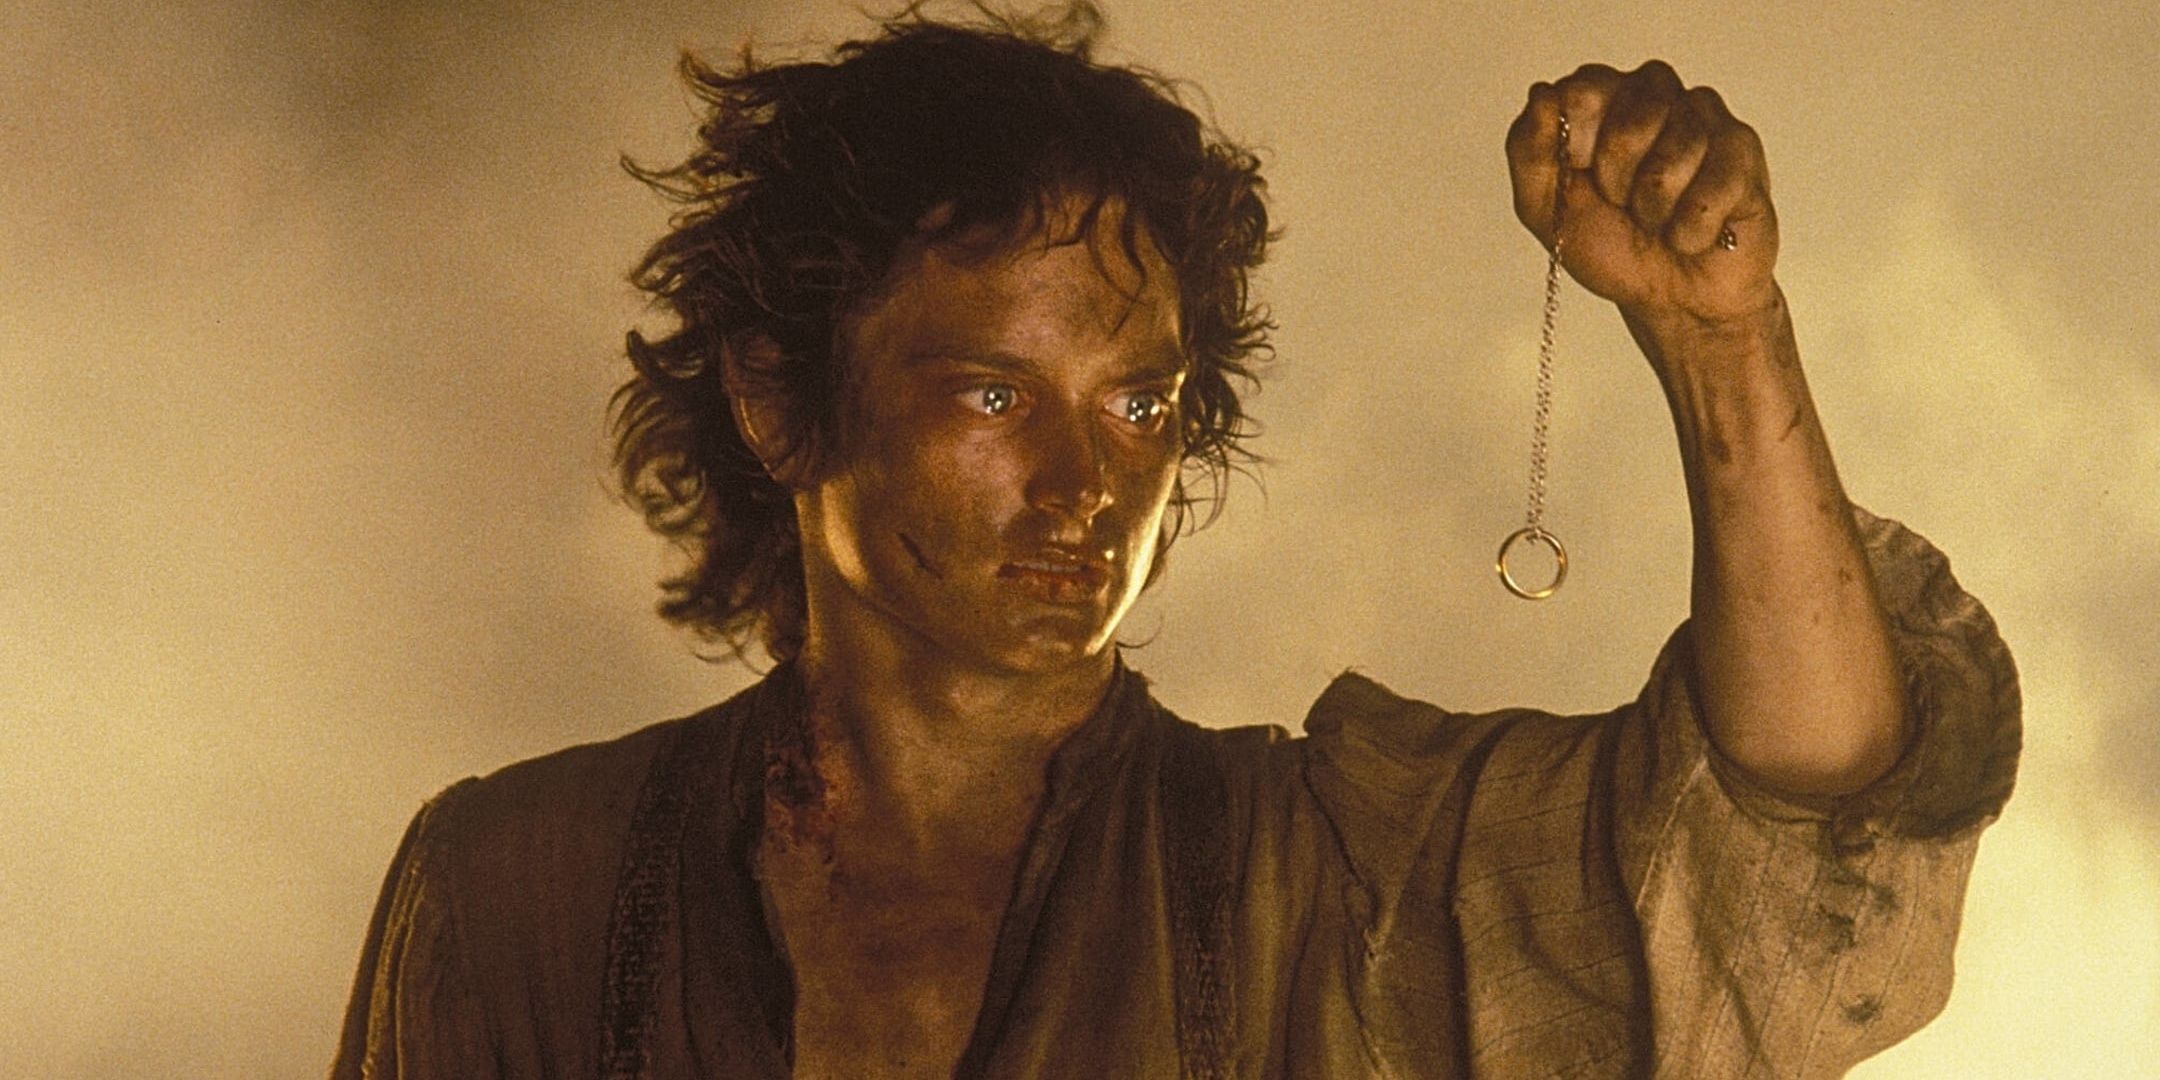 Frodo in The Lord of the Rings: Return of the King